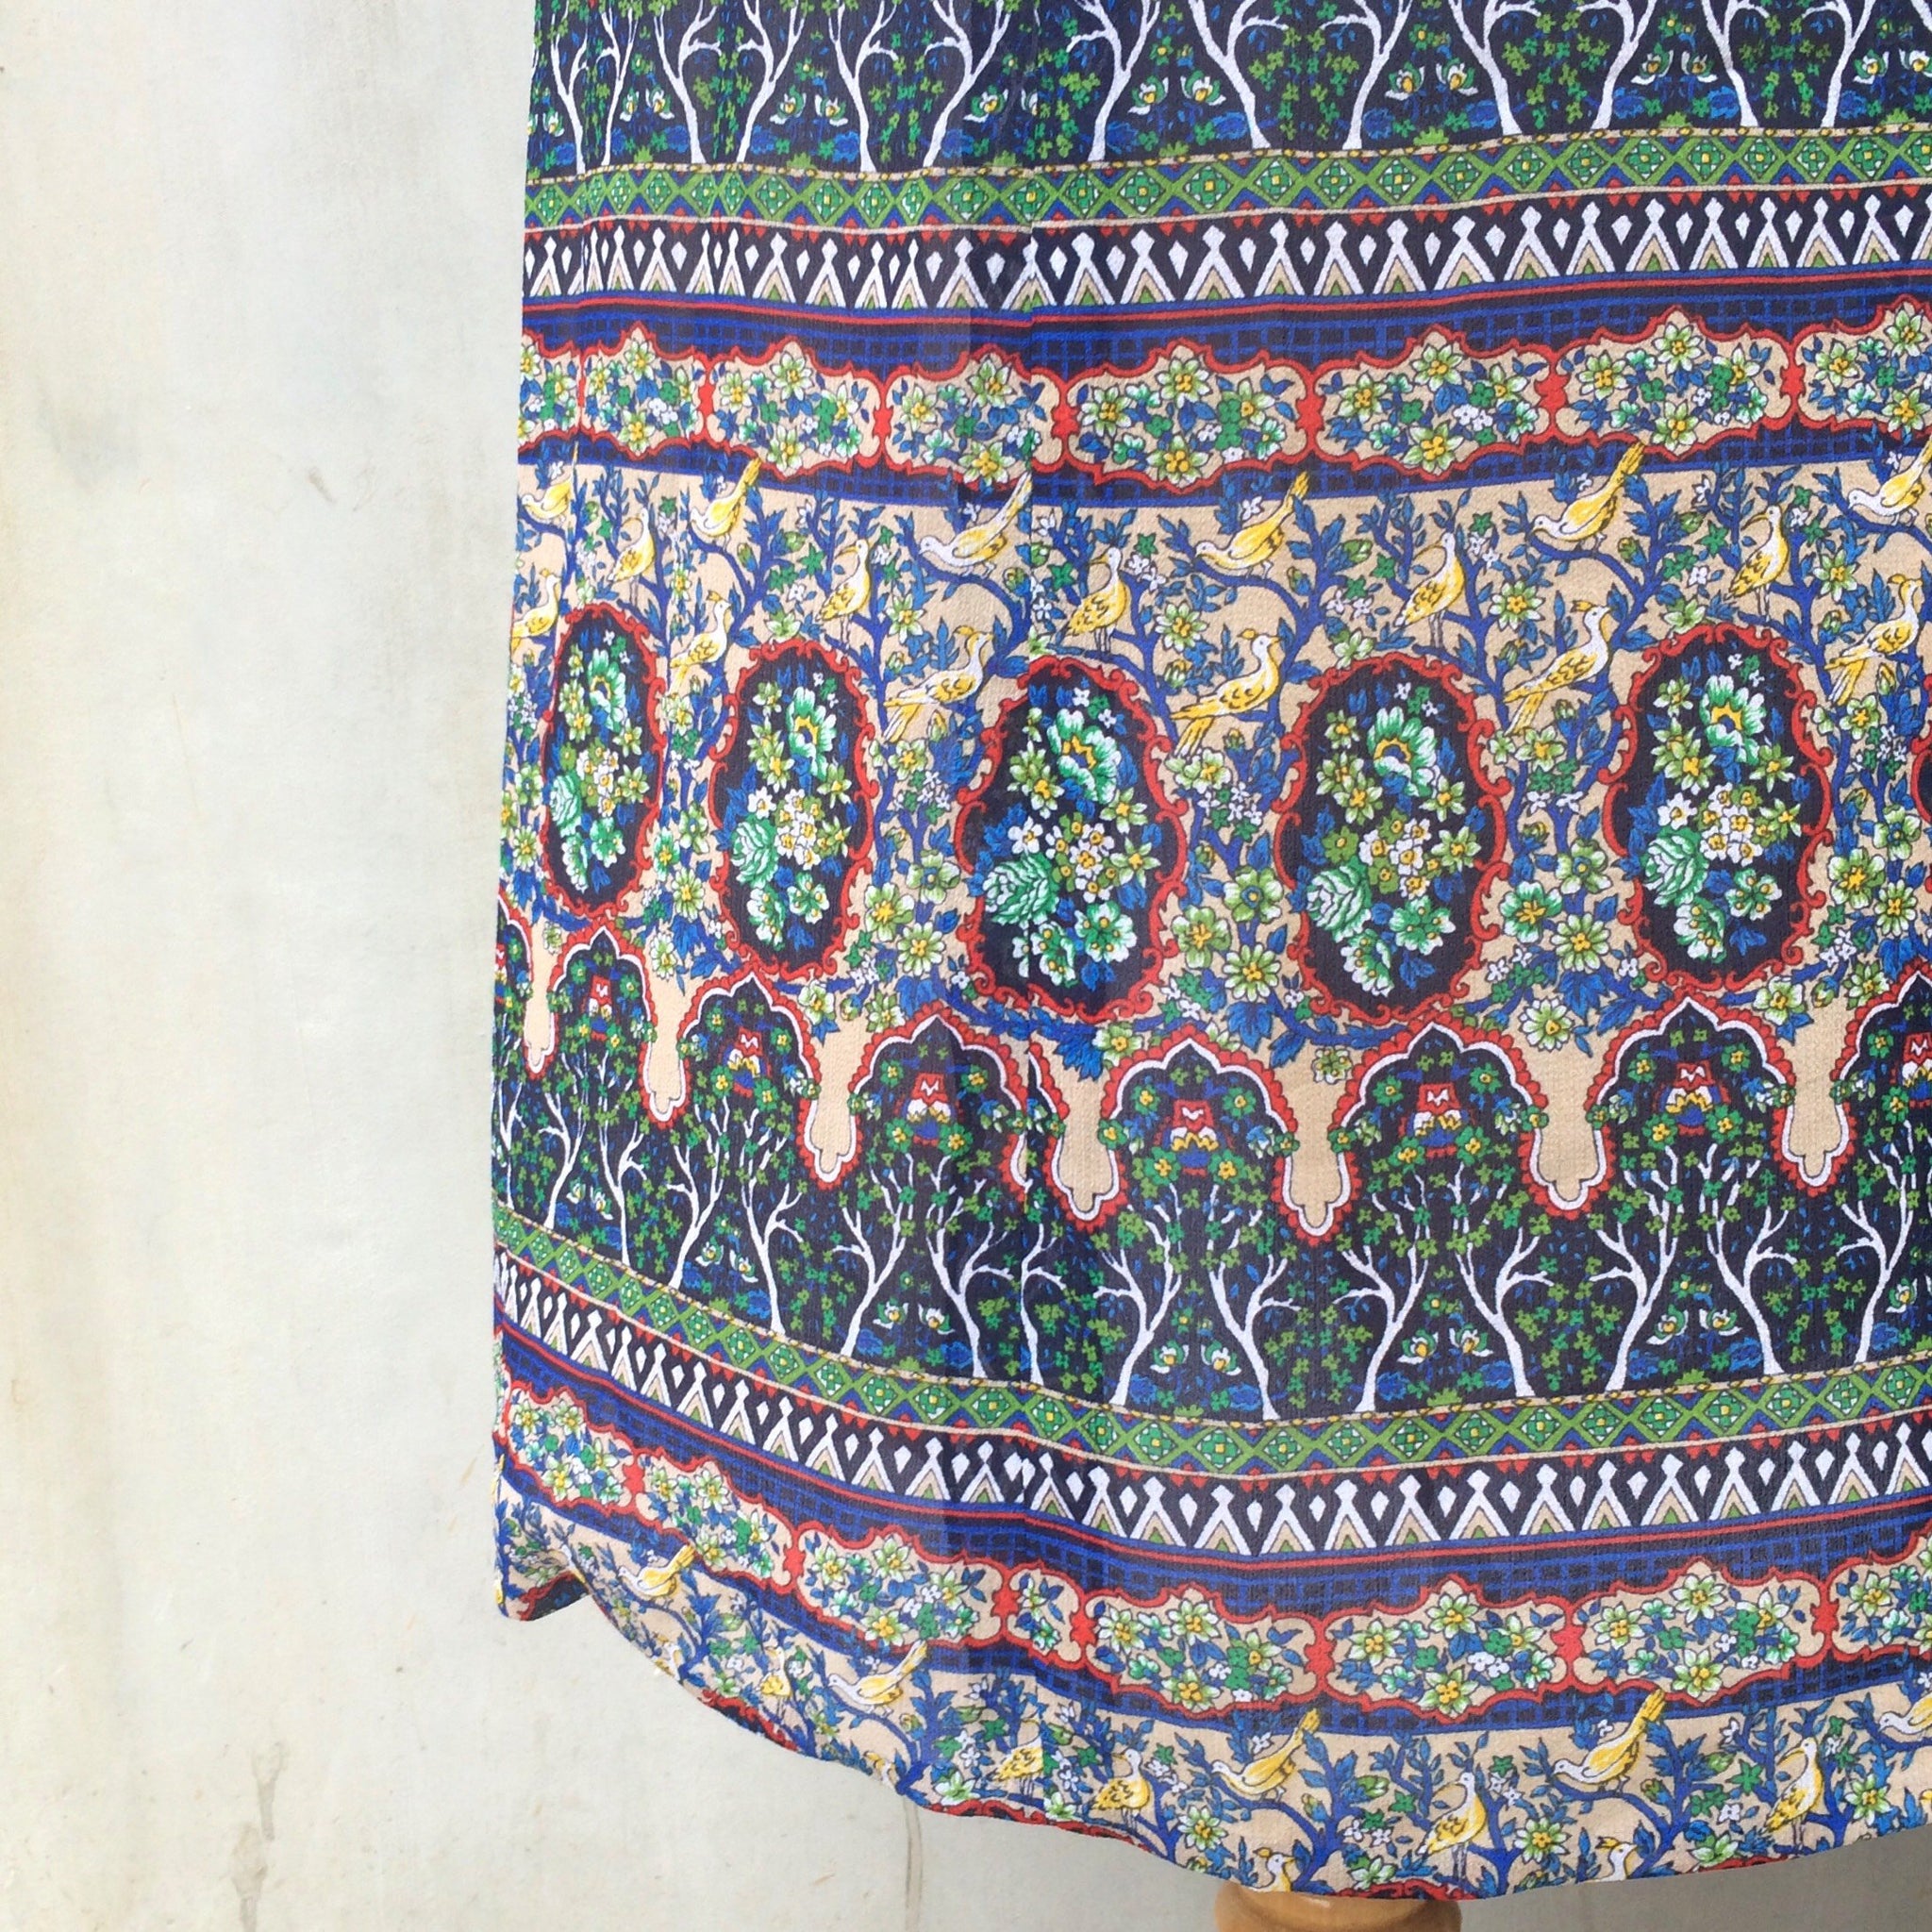 Vintage 1960s 1970s Indian ethnic print Midi skirt with Trees and Ornate Print